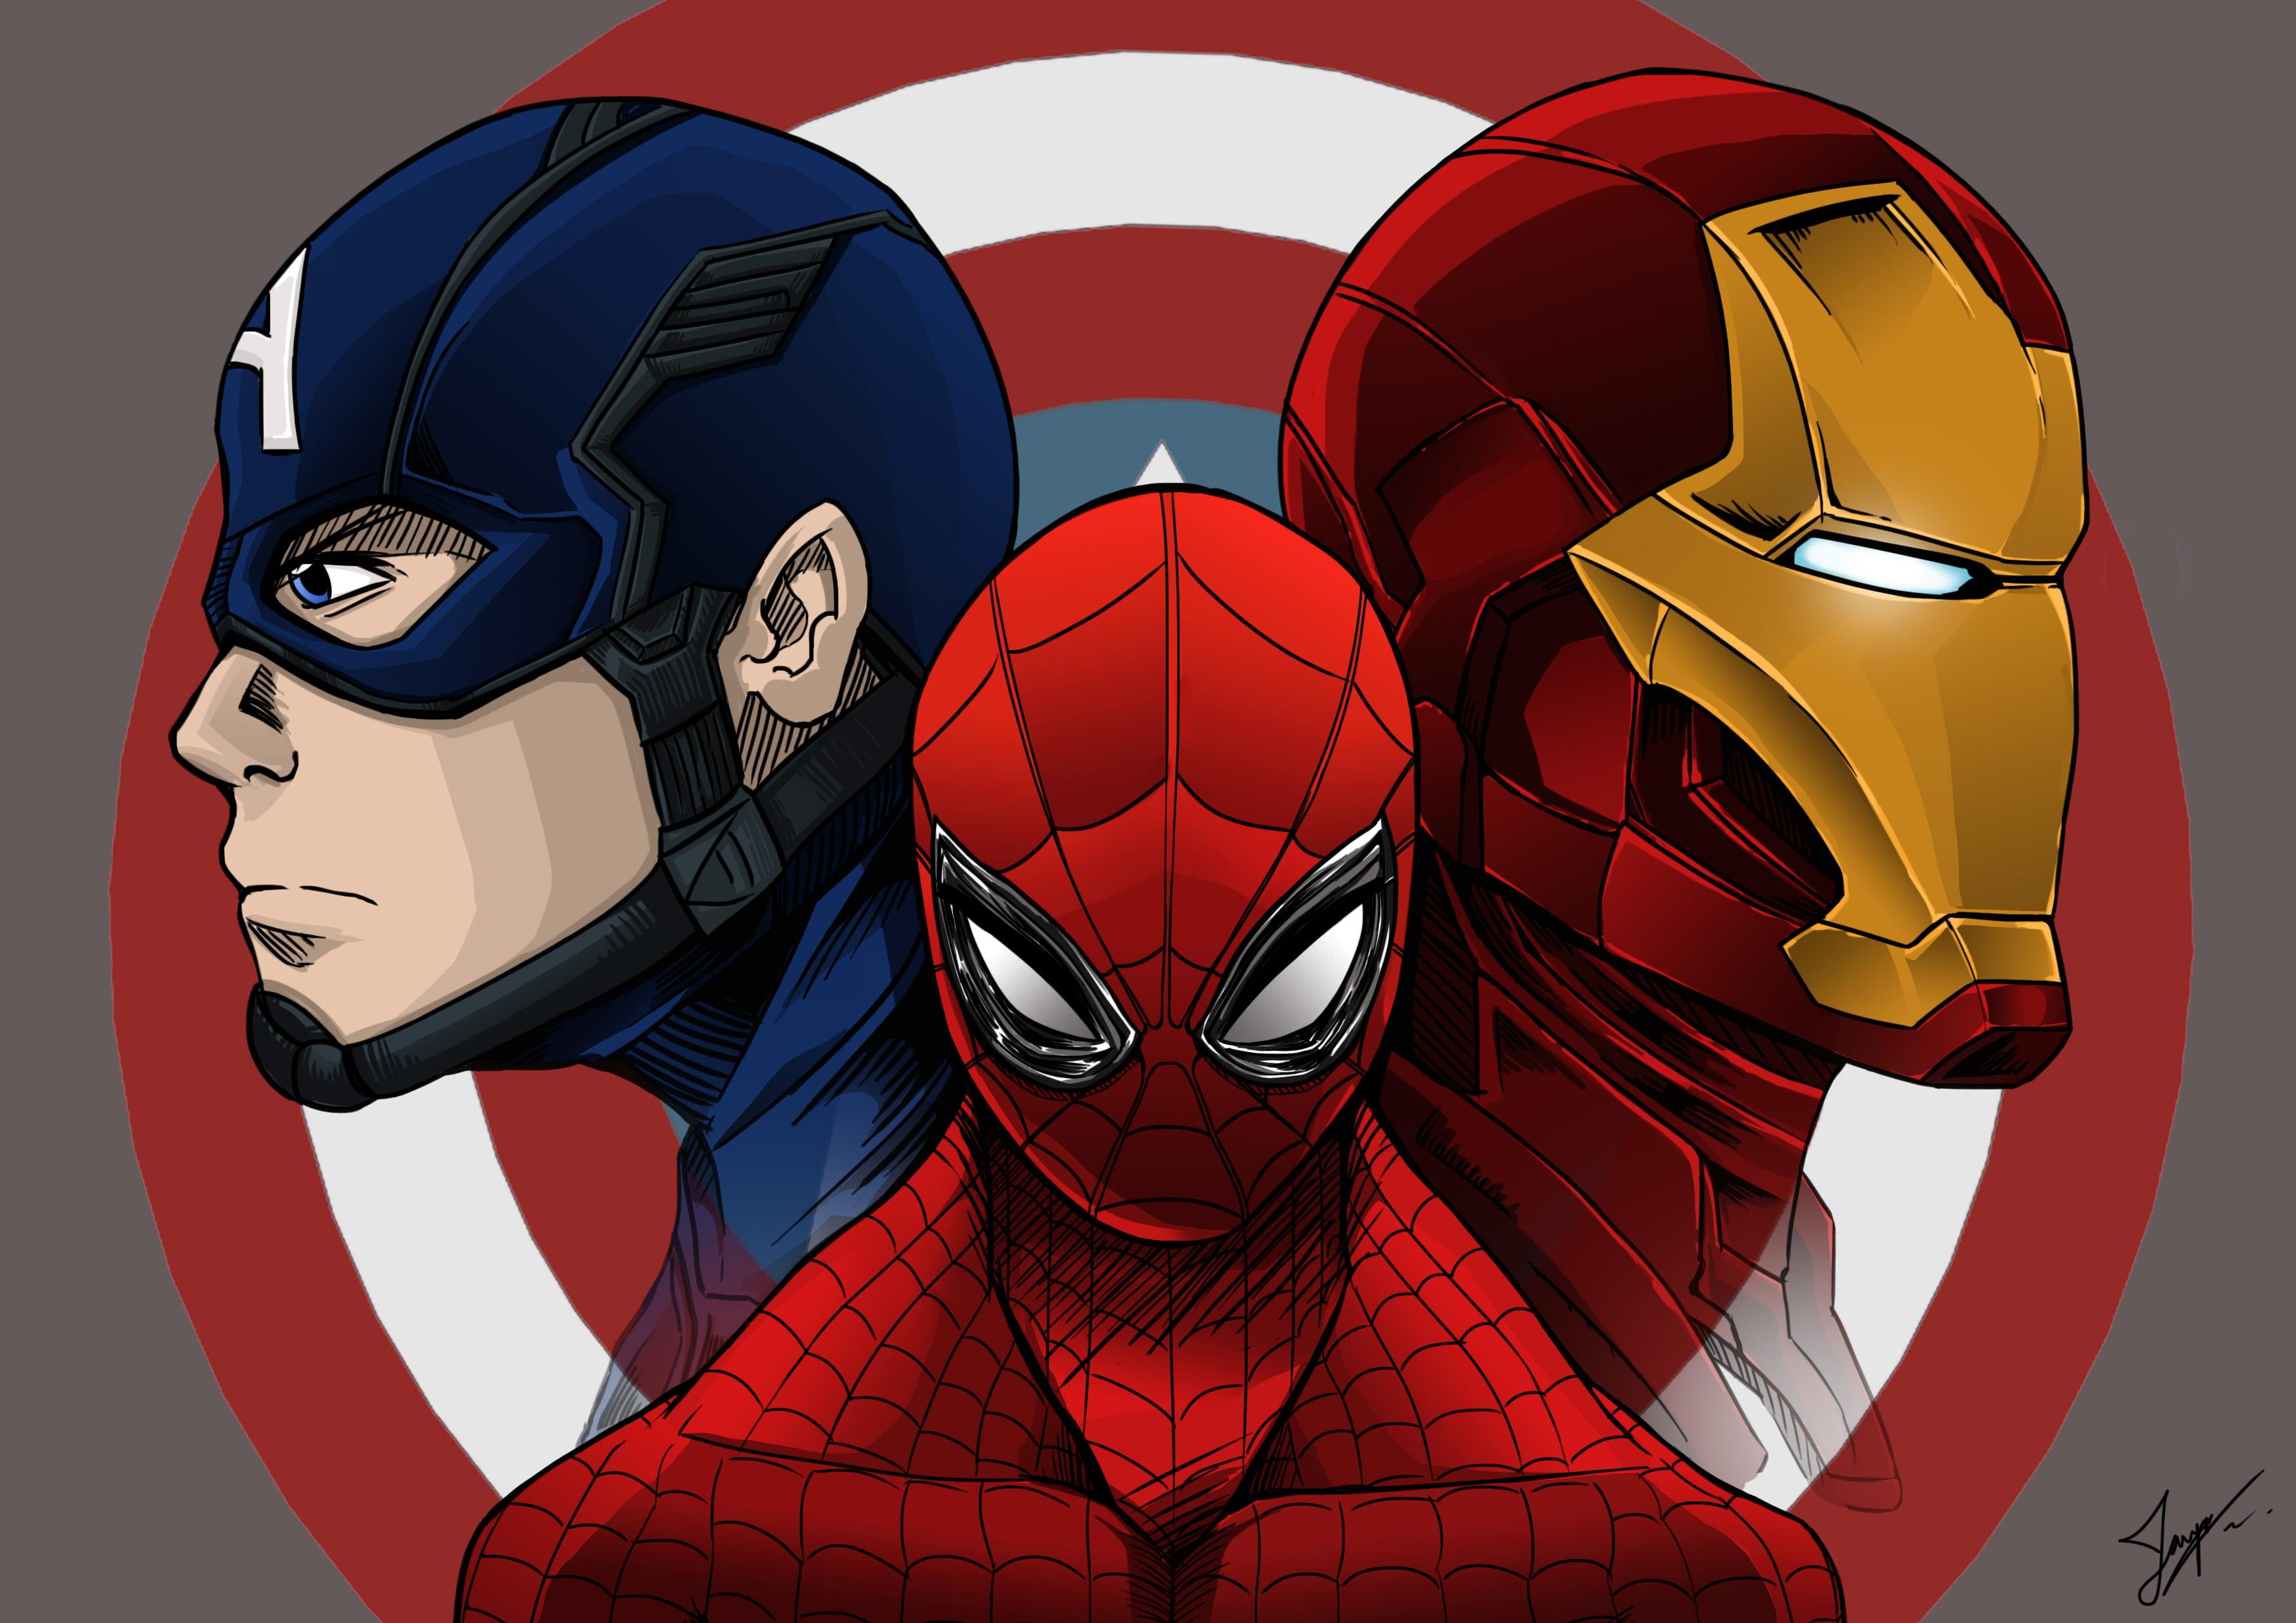 Spider Man, Iron Man And Captain America Poster HD Wallpaper